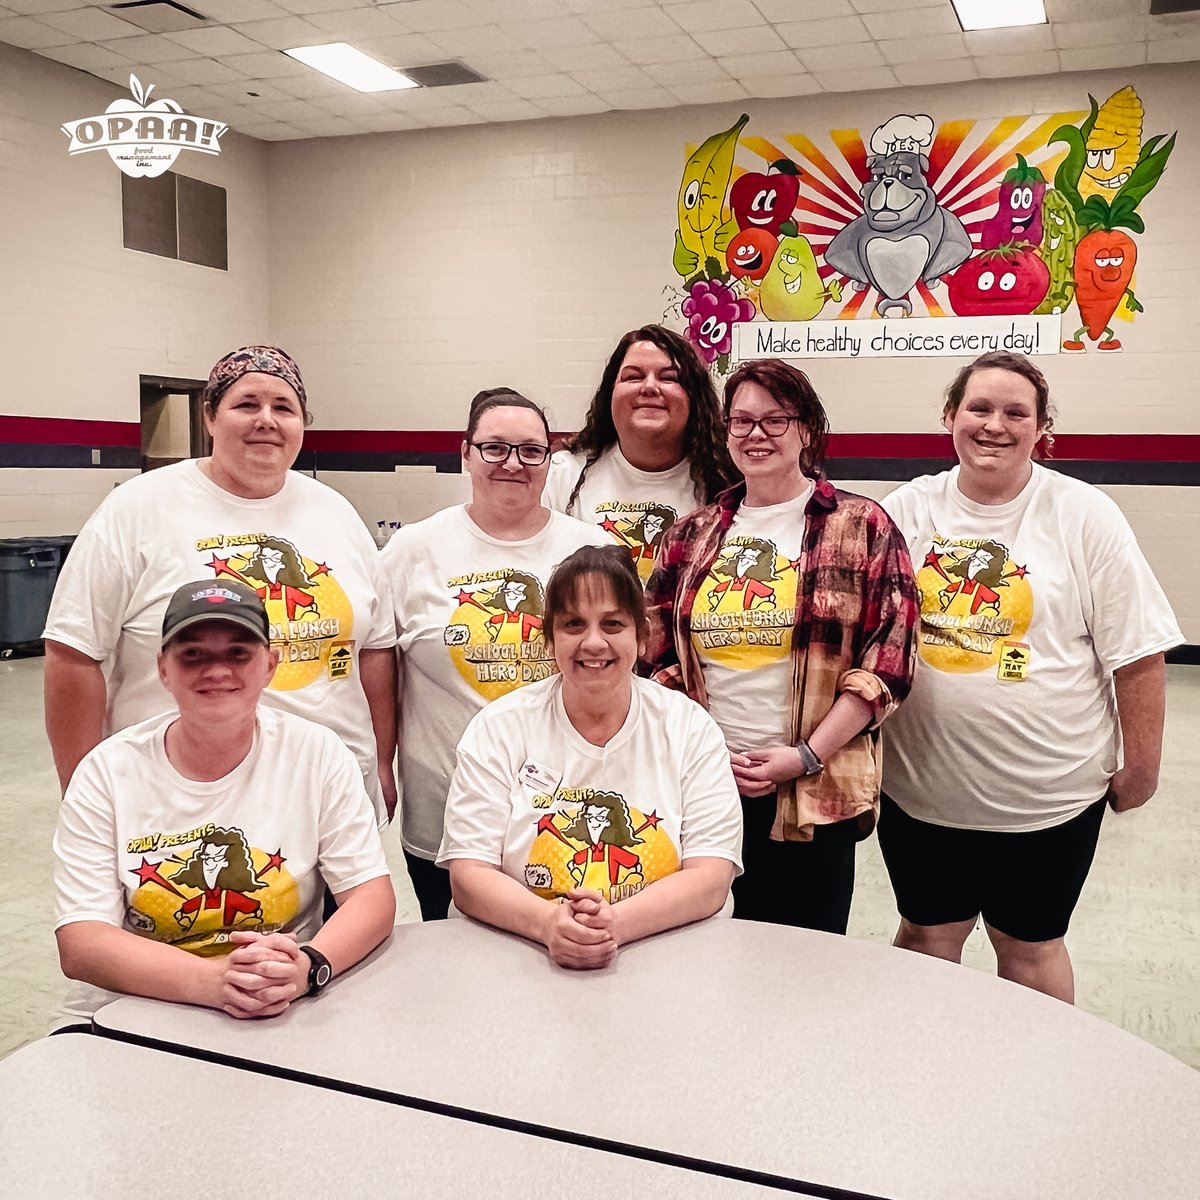 DNS Missy Qualkenbush and her Orleans team hosted a BBQ for students who participated in Battle of the Books. This event was a long-standing tradition, and they were excited to bring it back. Thank you to Missy and her team for giving the kids a fun day! 🍔#maketheirday